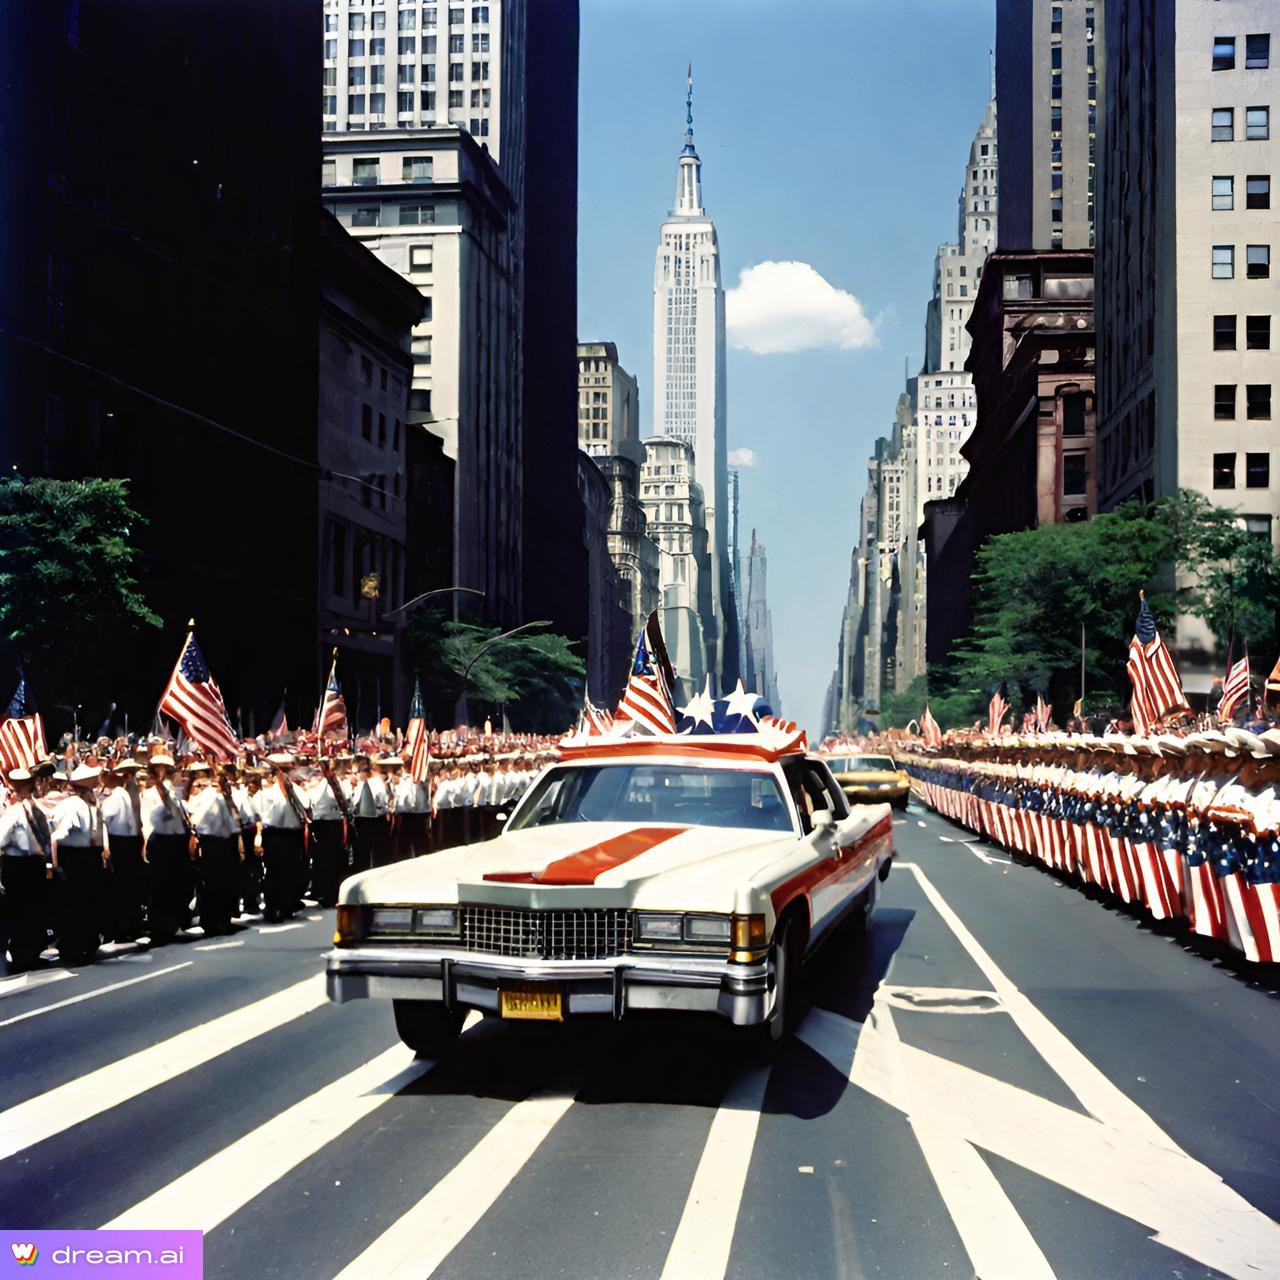 a car with a flag on the top and a group of people marching in the street